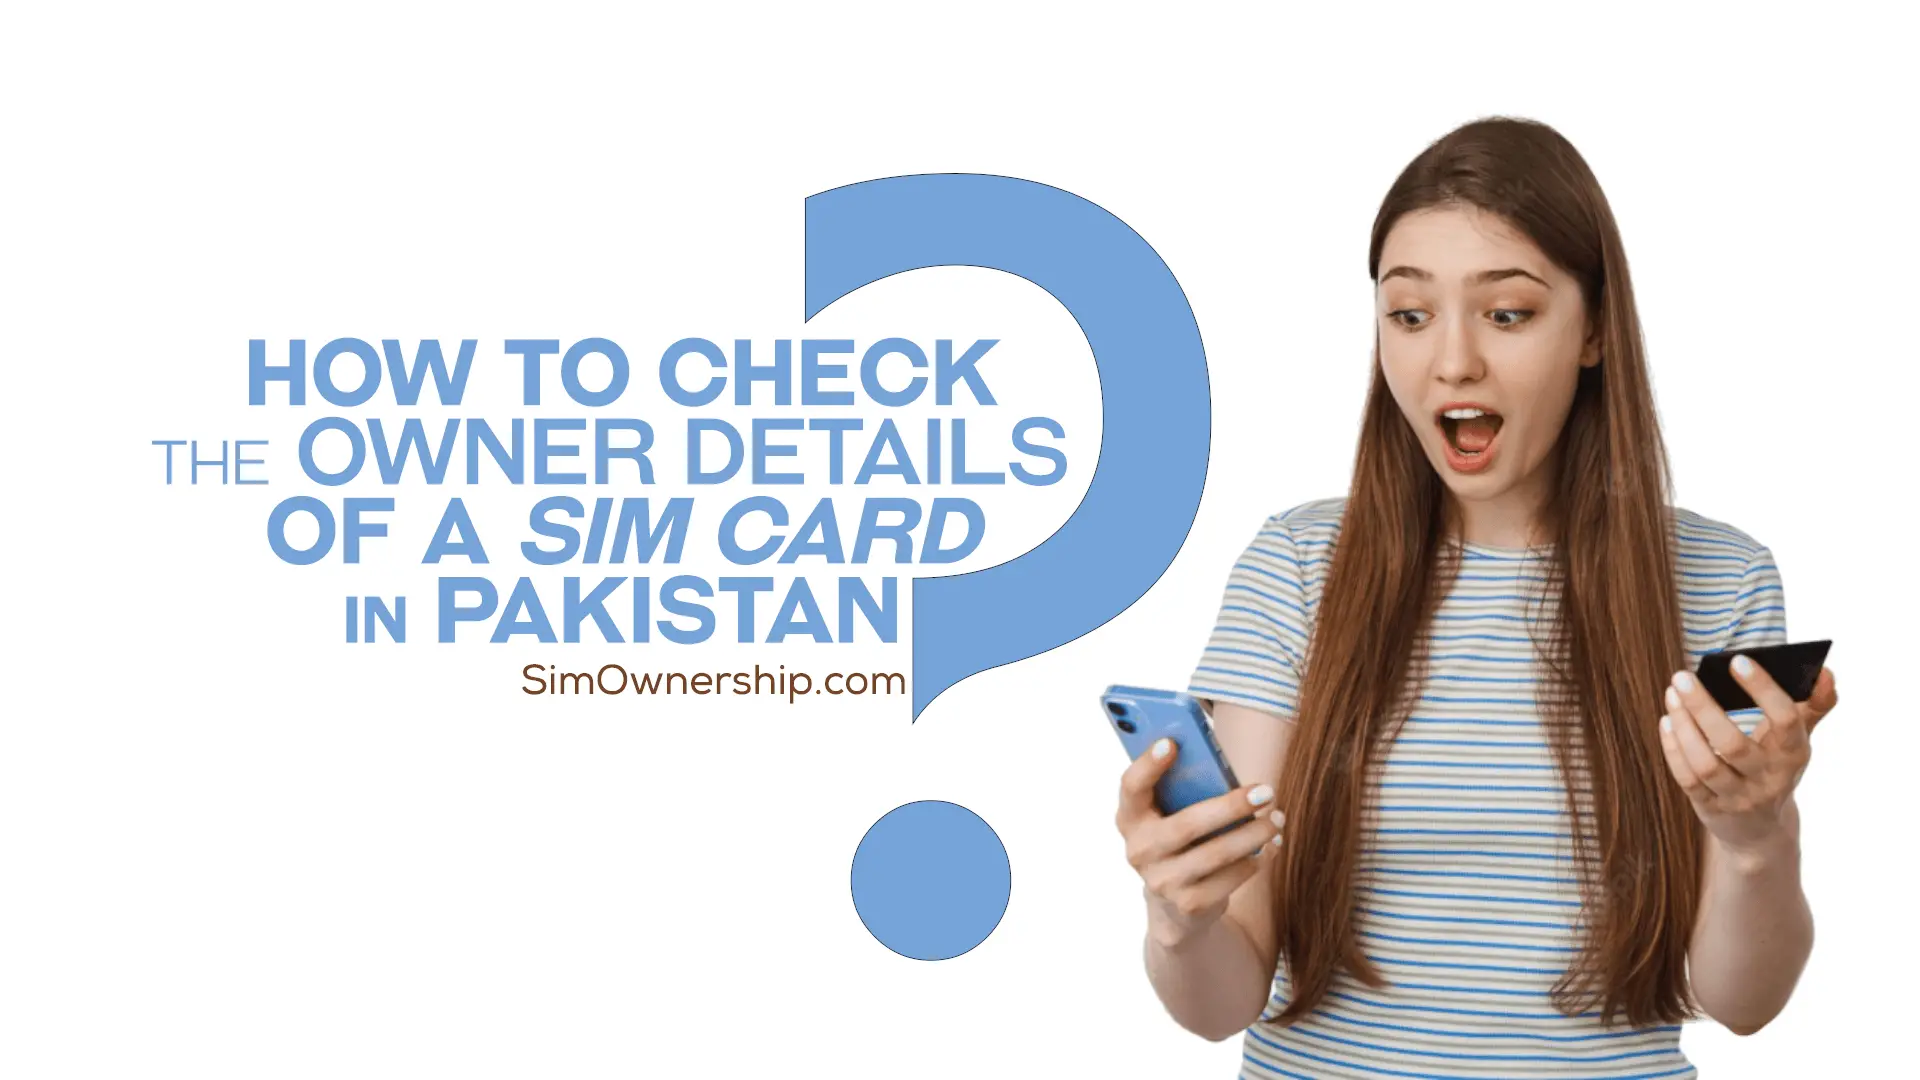 HOW TO CHECK OWNER DETAILS OF A SIM CARD IN PAKISTAN?